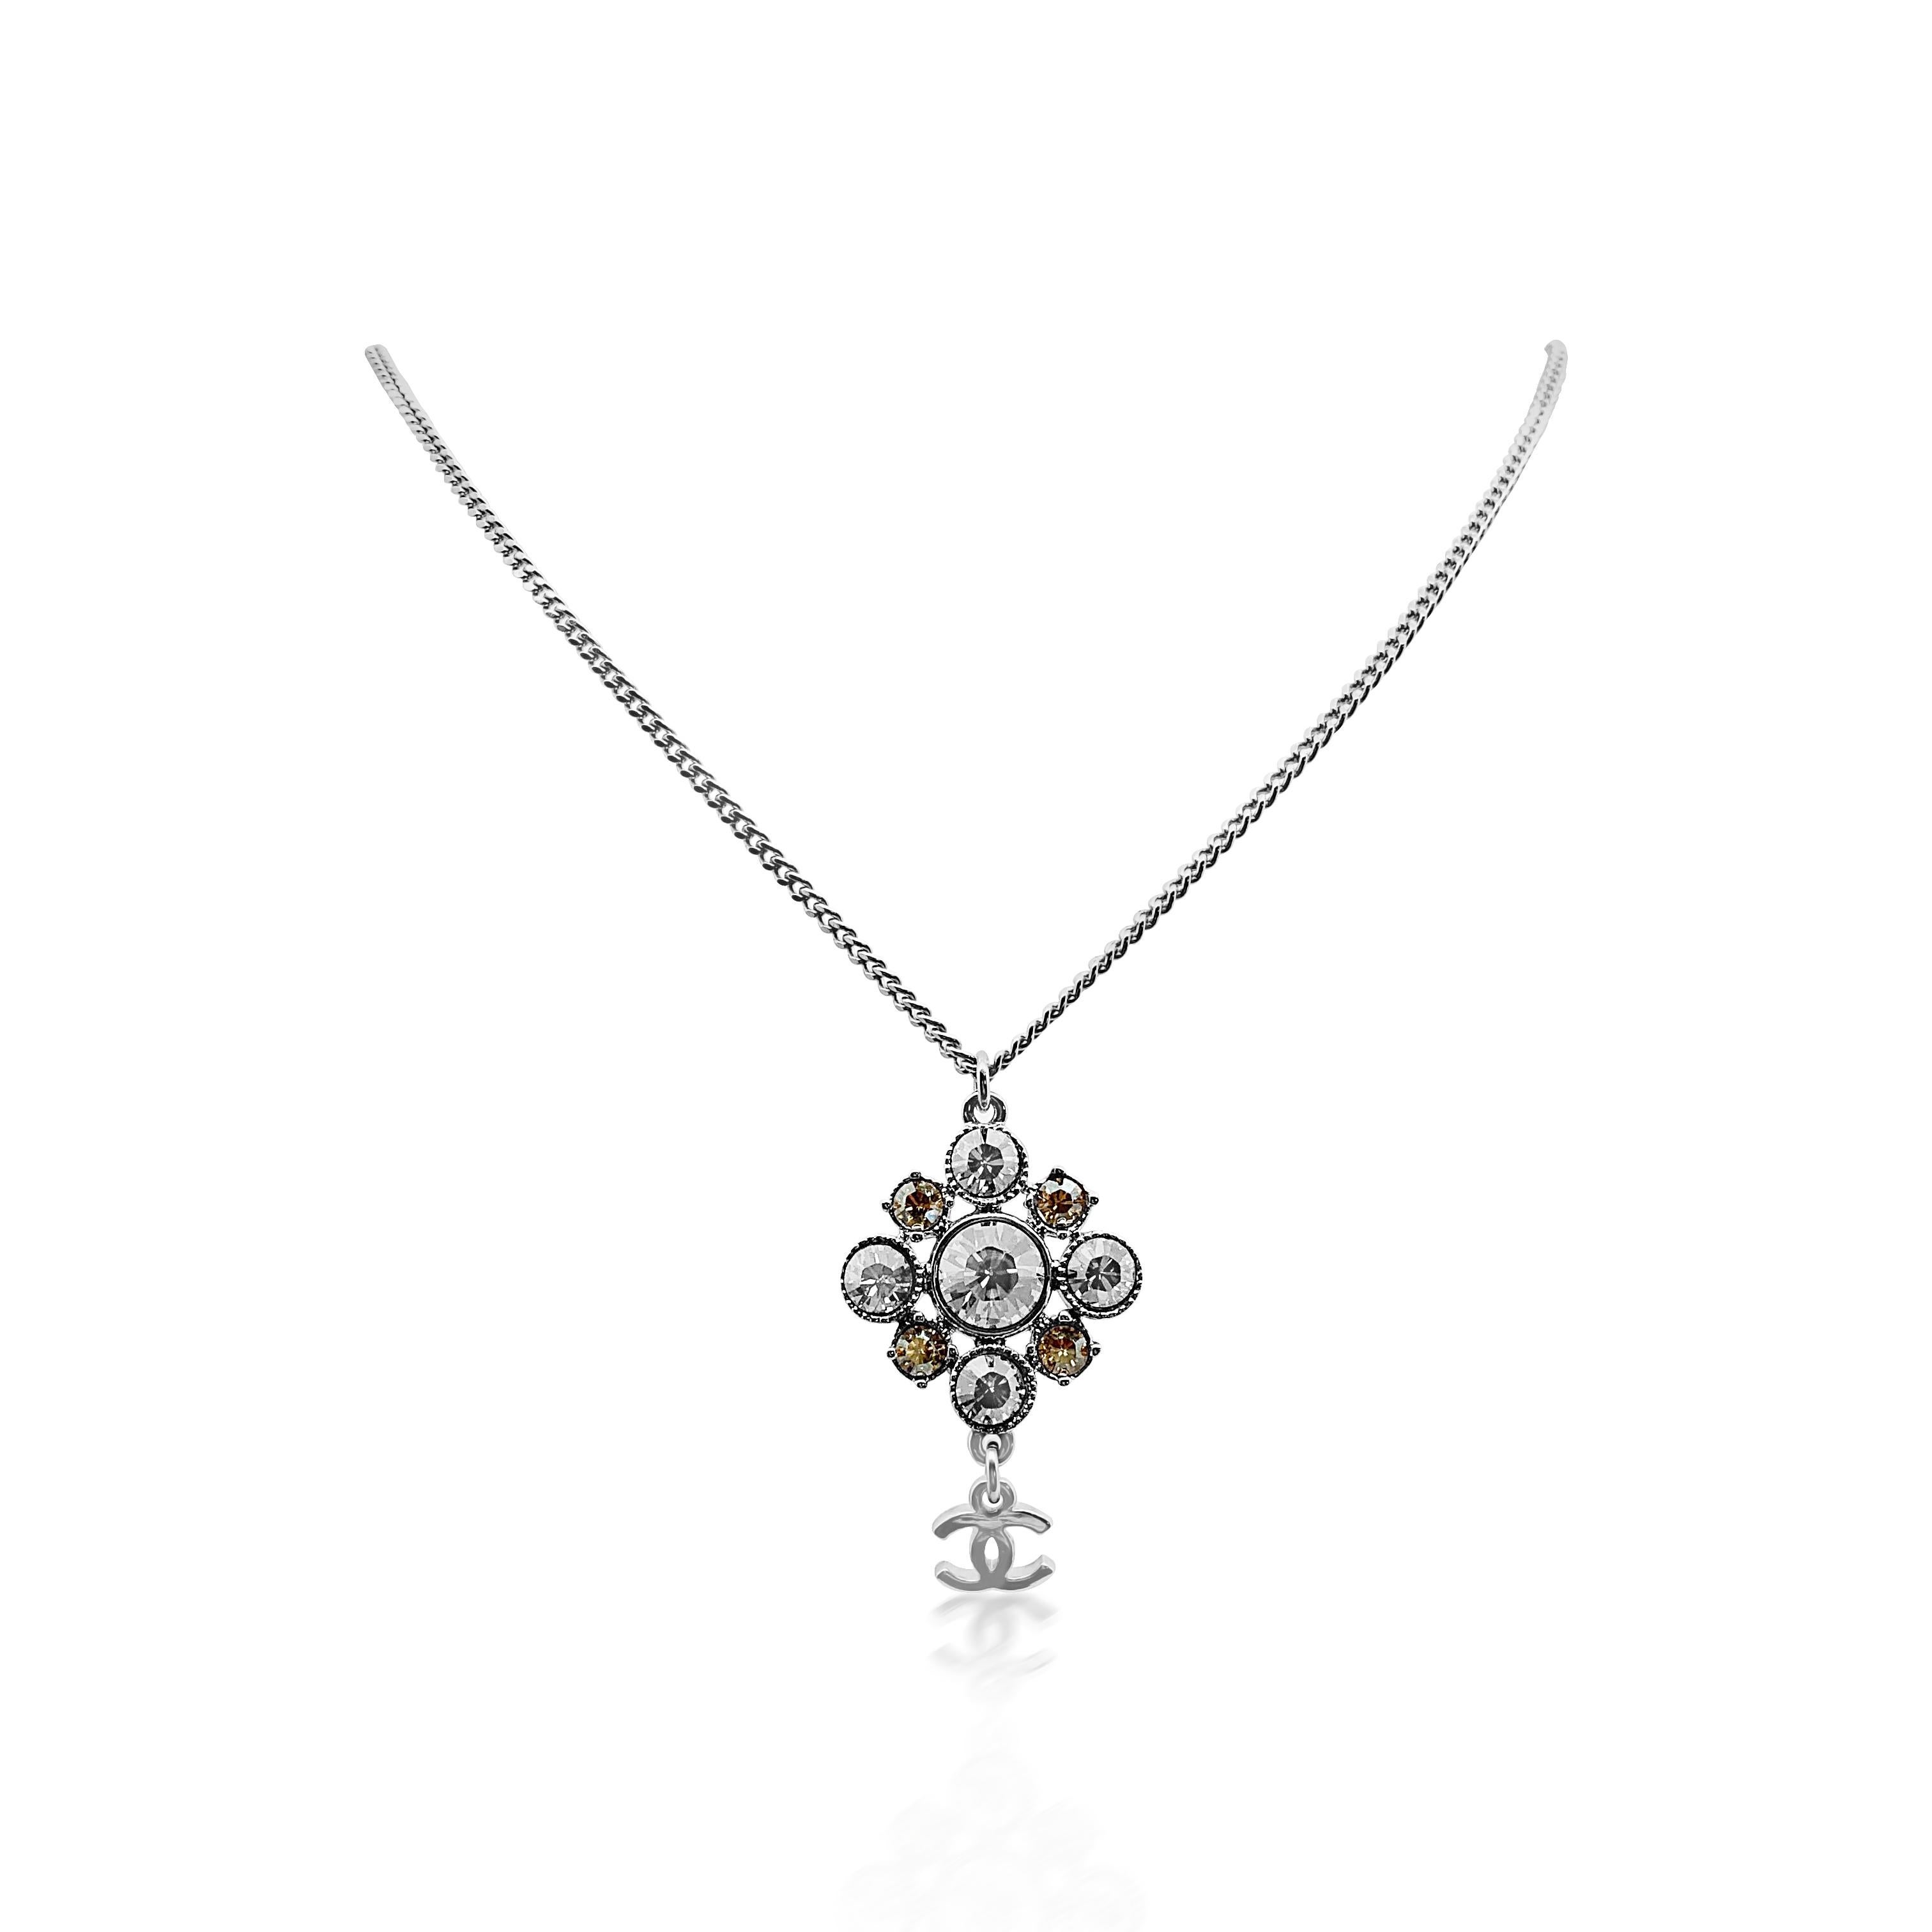 A wonderfully feminine Chanel Crystal Logo Necklace. Crafted in silver-tone metal with crystals. Featuring a Maltese cross inspired pendant set with clear and champagne coloured crystals finished with the iconic CC logo for a drop. In very good